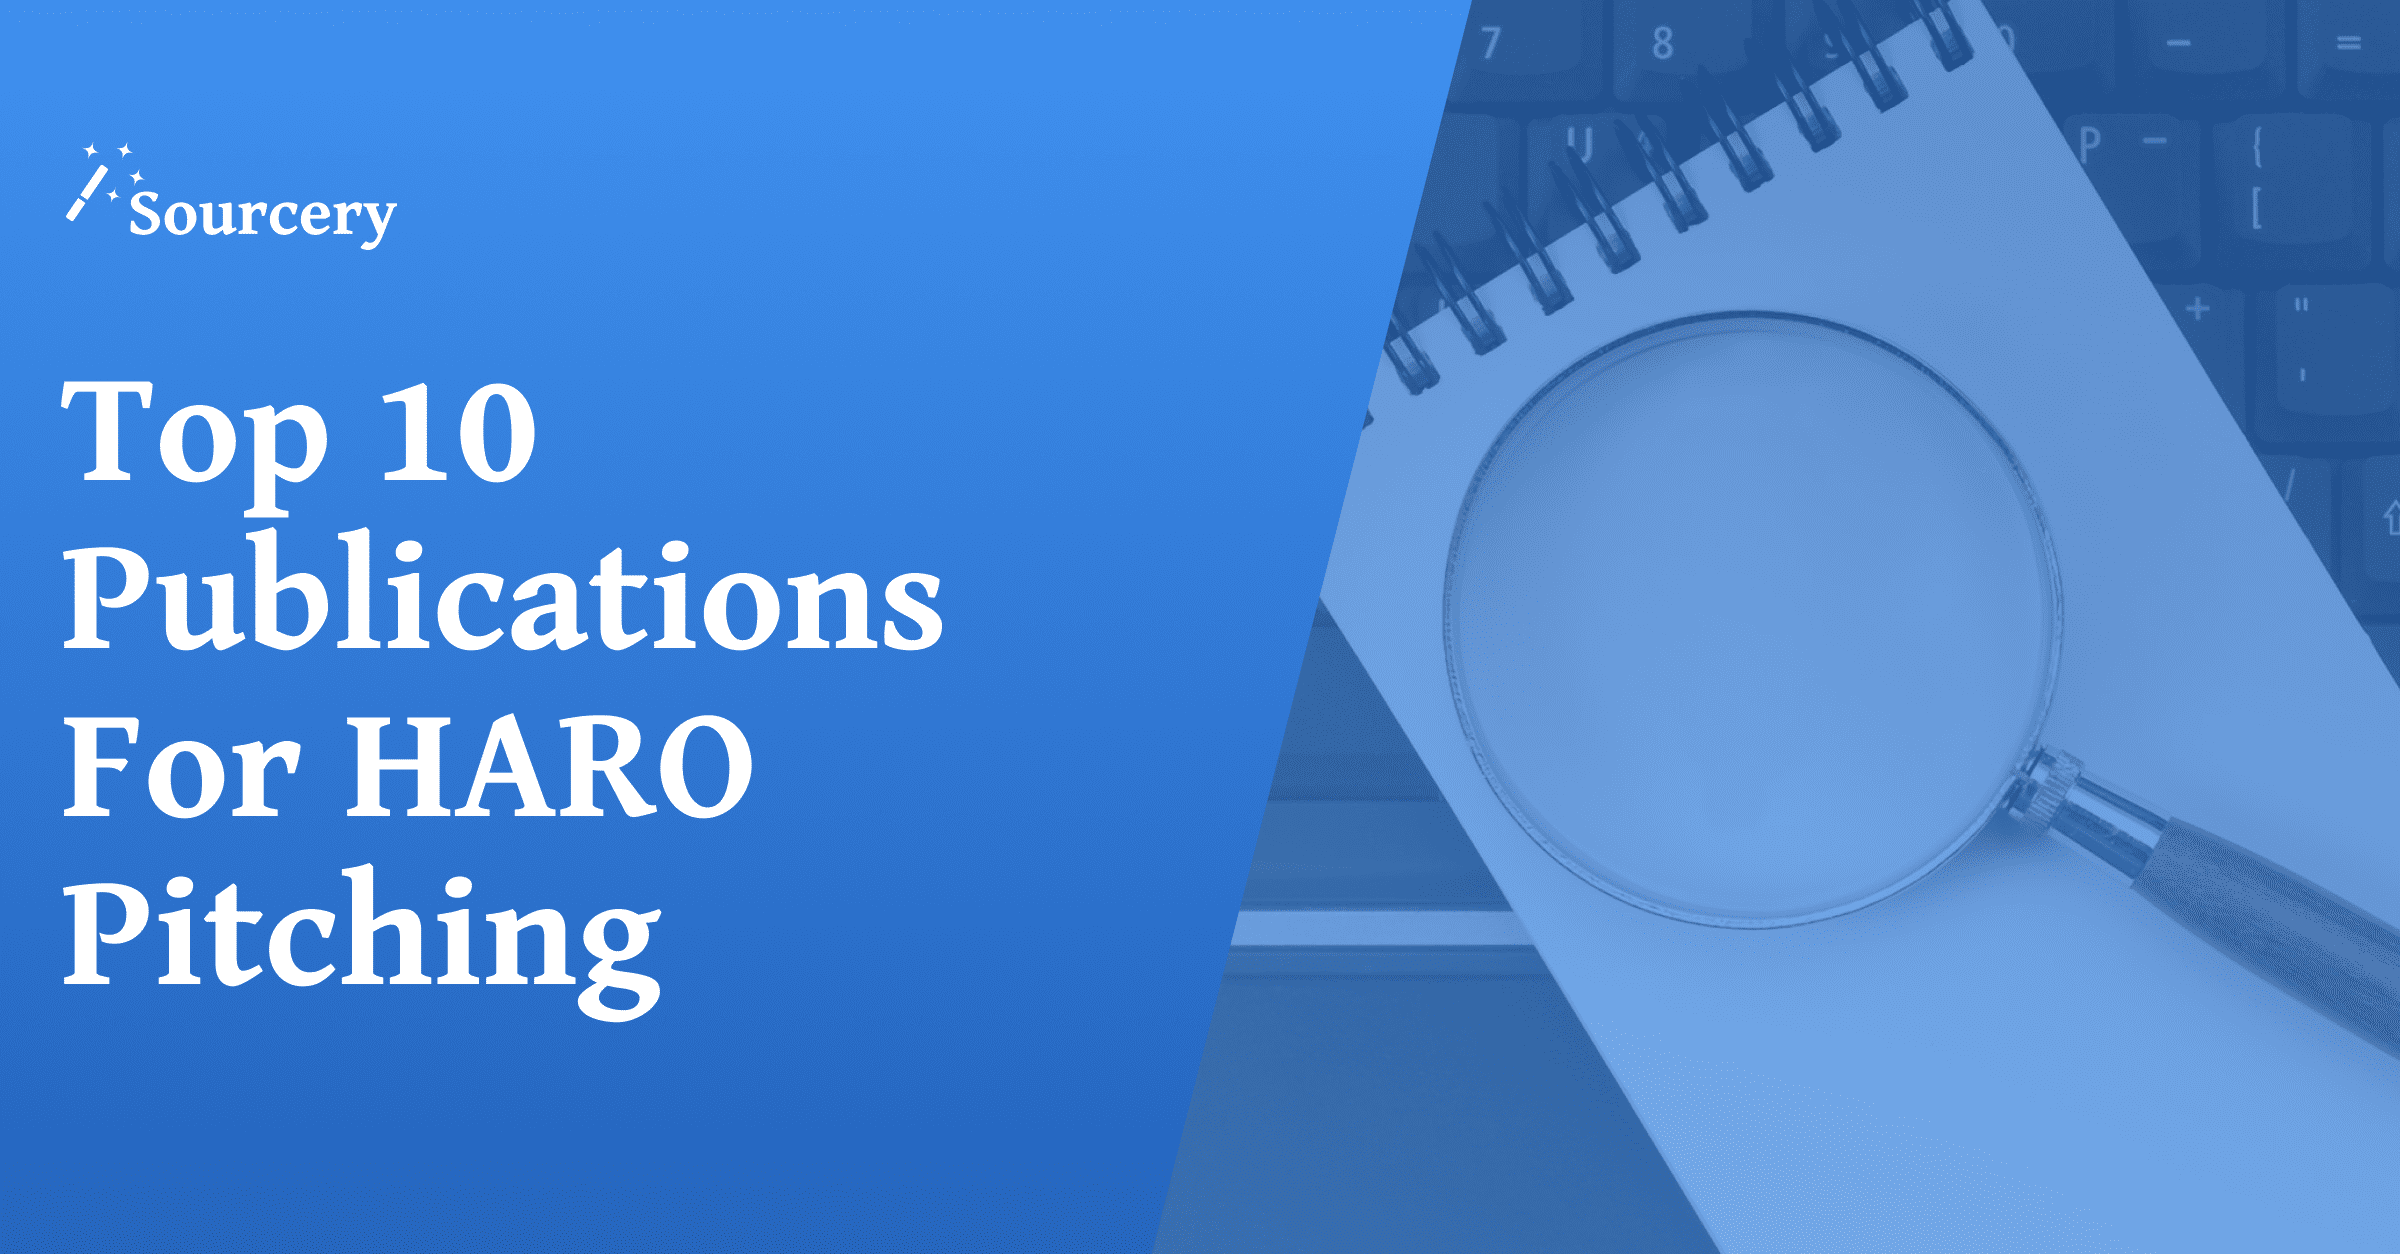 Our Top 10 Publications for HARO Pitching and Why We Like Them